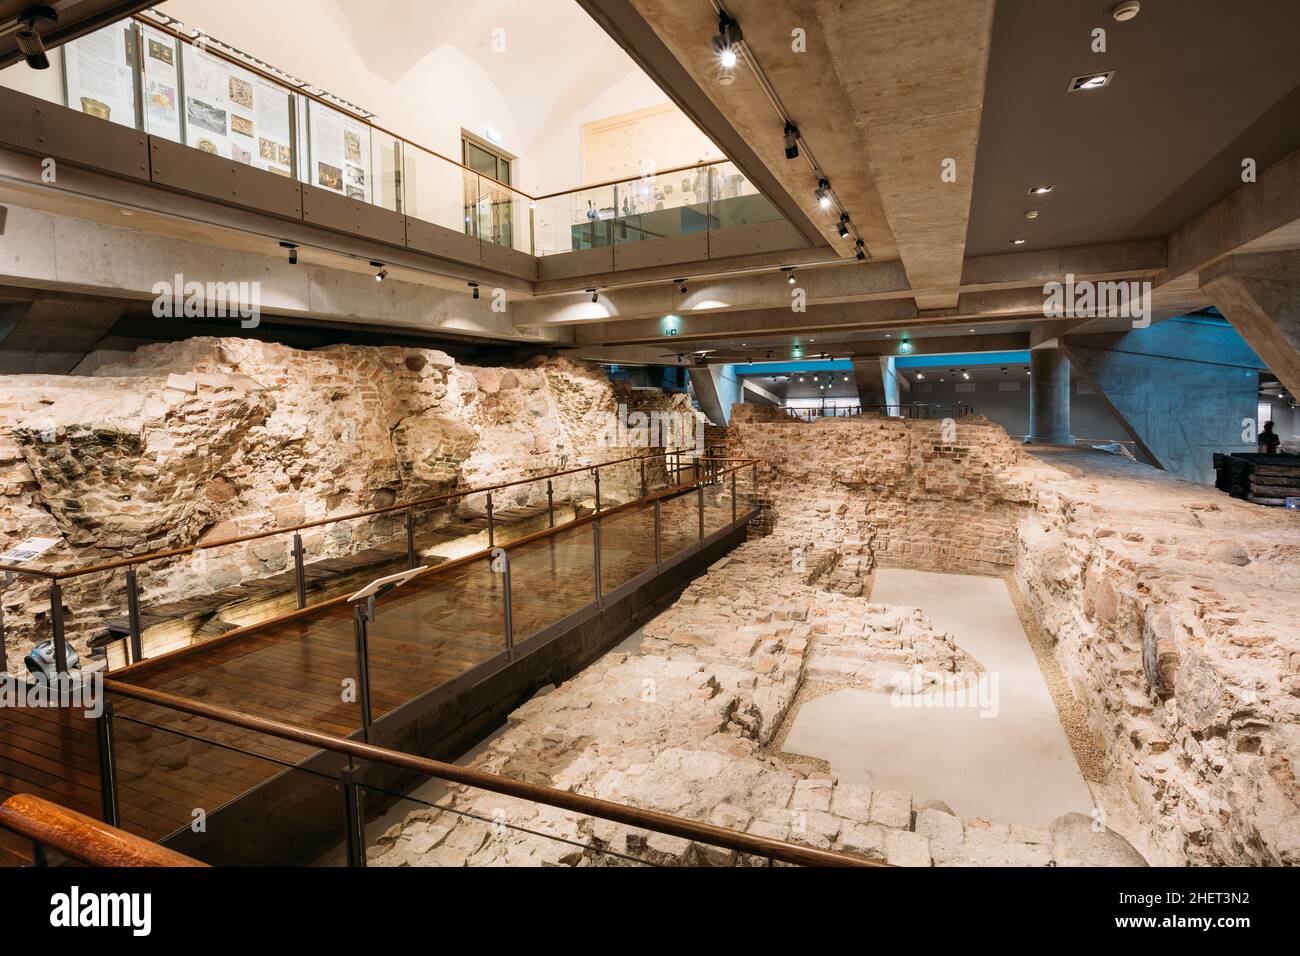 Exhibition Hall Of Medieval Ruins In Palace Of The Grand Dukes Of Lithuania, Vilnius. Stock Photo